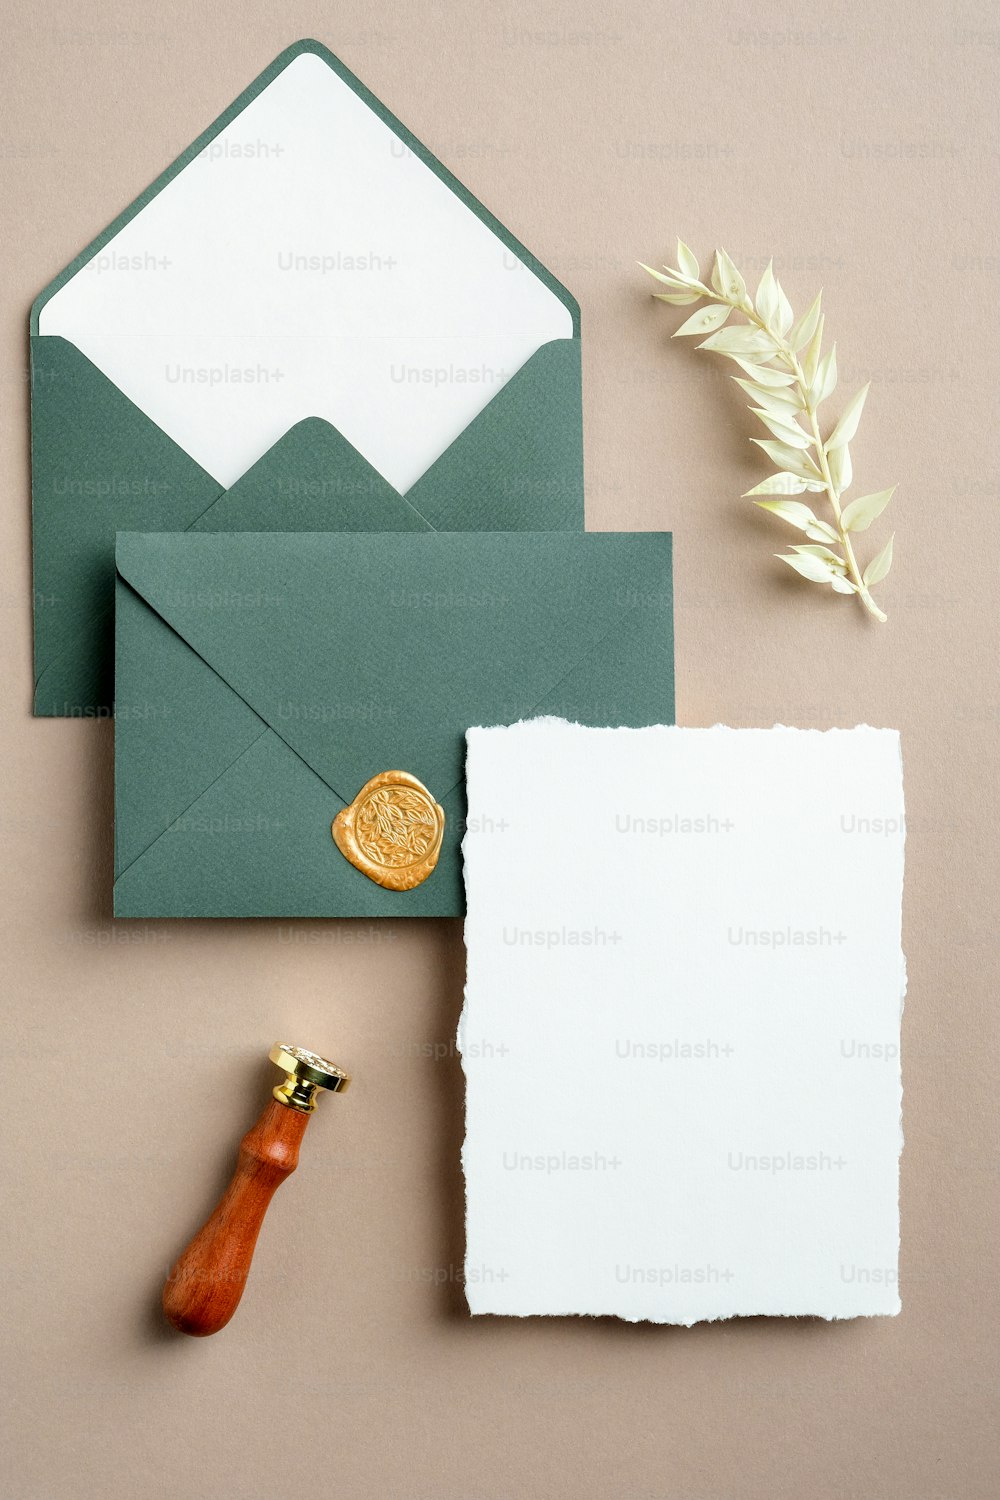 Wedding stationery set top view. Flat lay blank invitation card mockup, green envelopes, wax seal stamp, dried flowers.